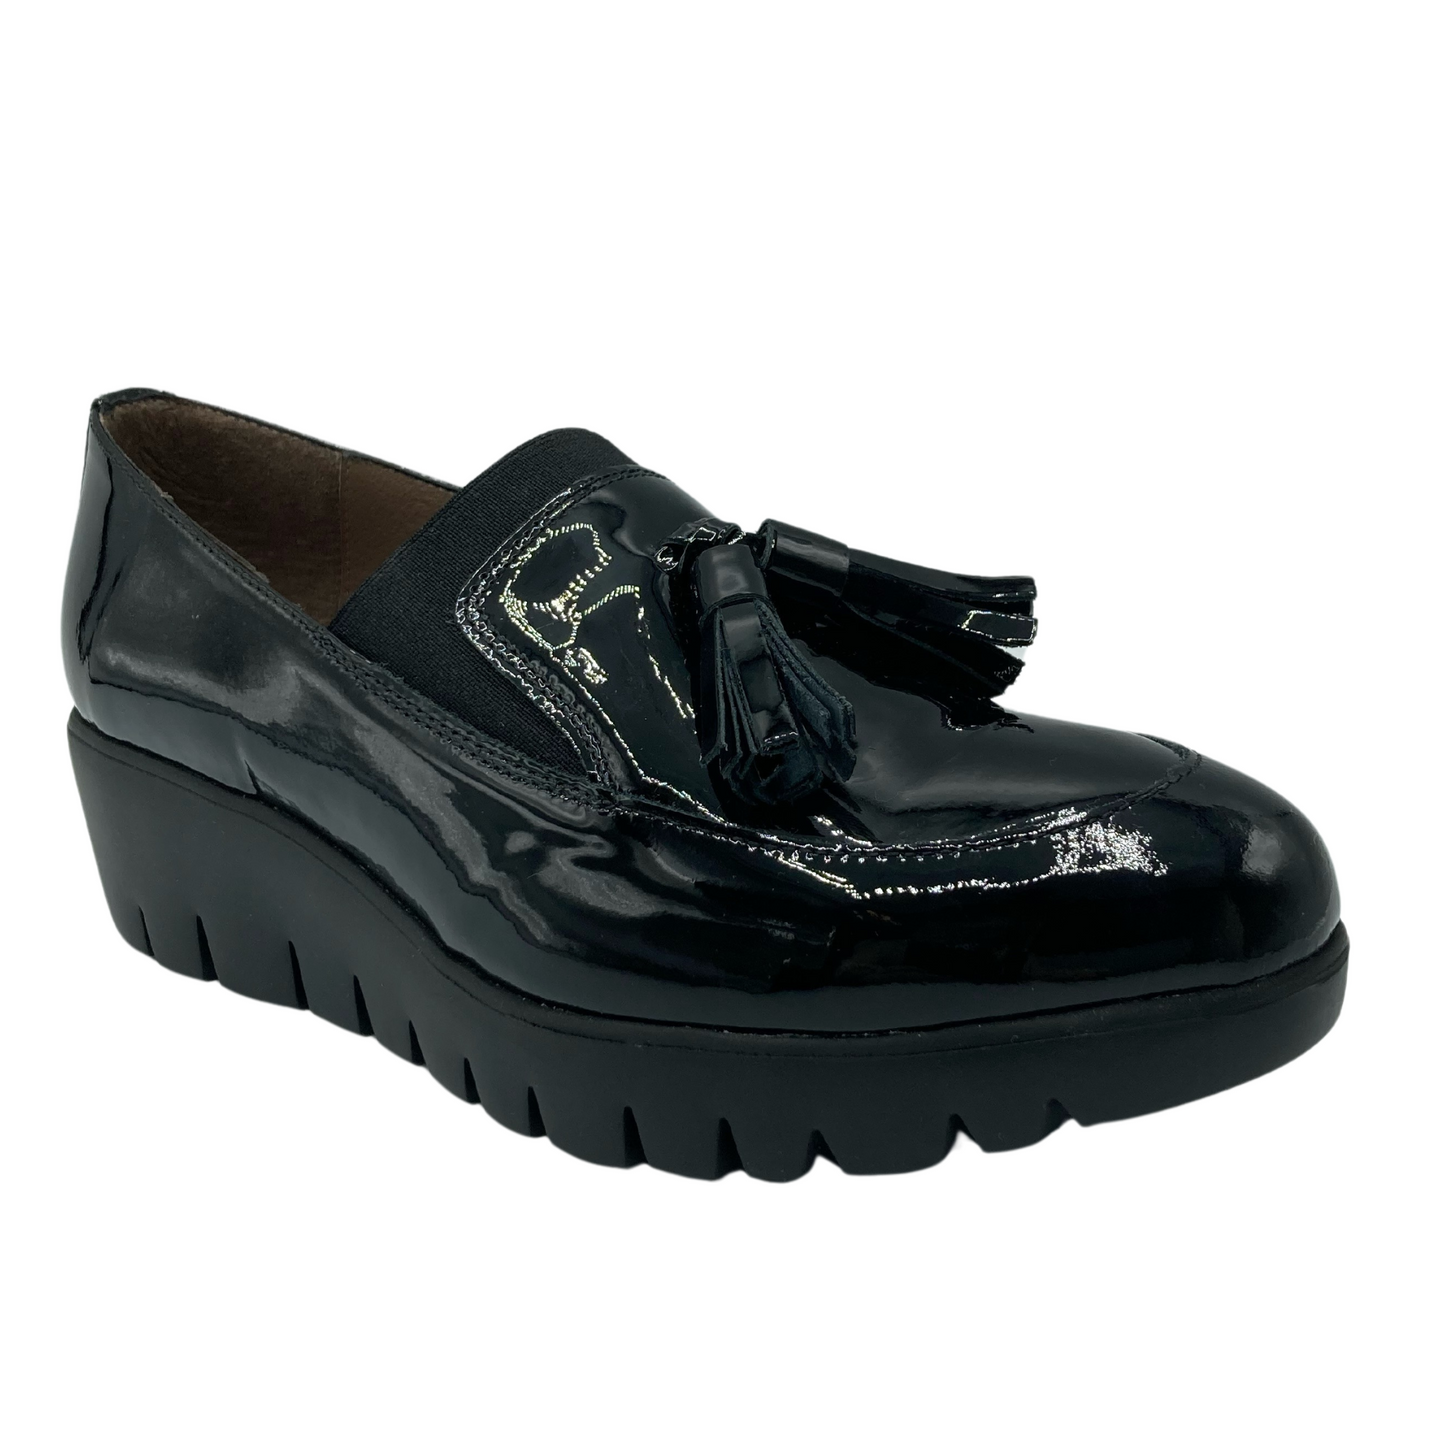 45 degree angled view of black patent loafer with tassel detail on toe box